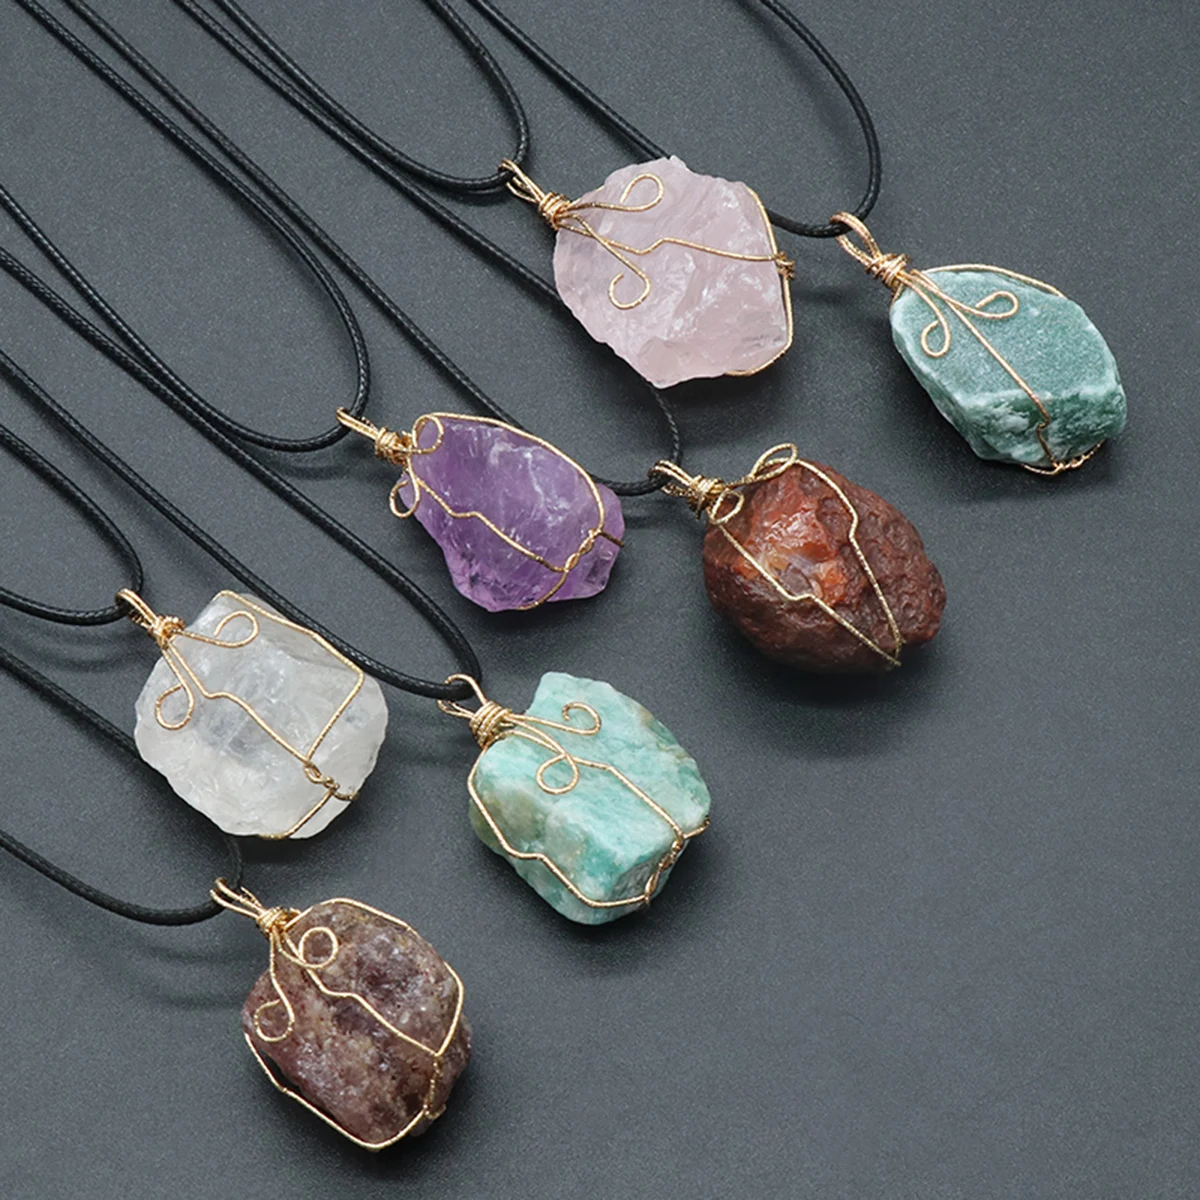 

Natural Stone Raw Stone Winding Pendant Necklace Agate Rose Quartz Fluorite for Women Charm Jewelry Pendant Necklace Gift